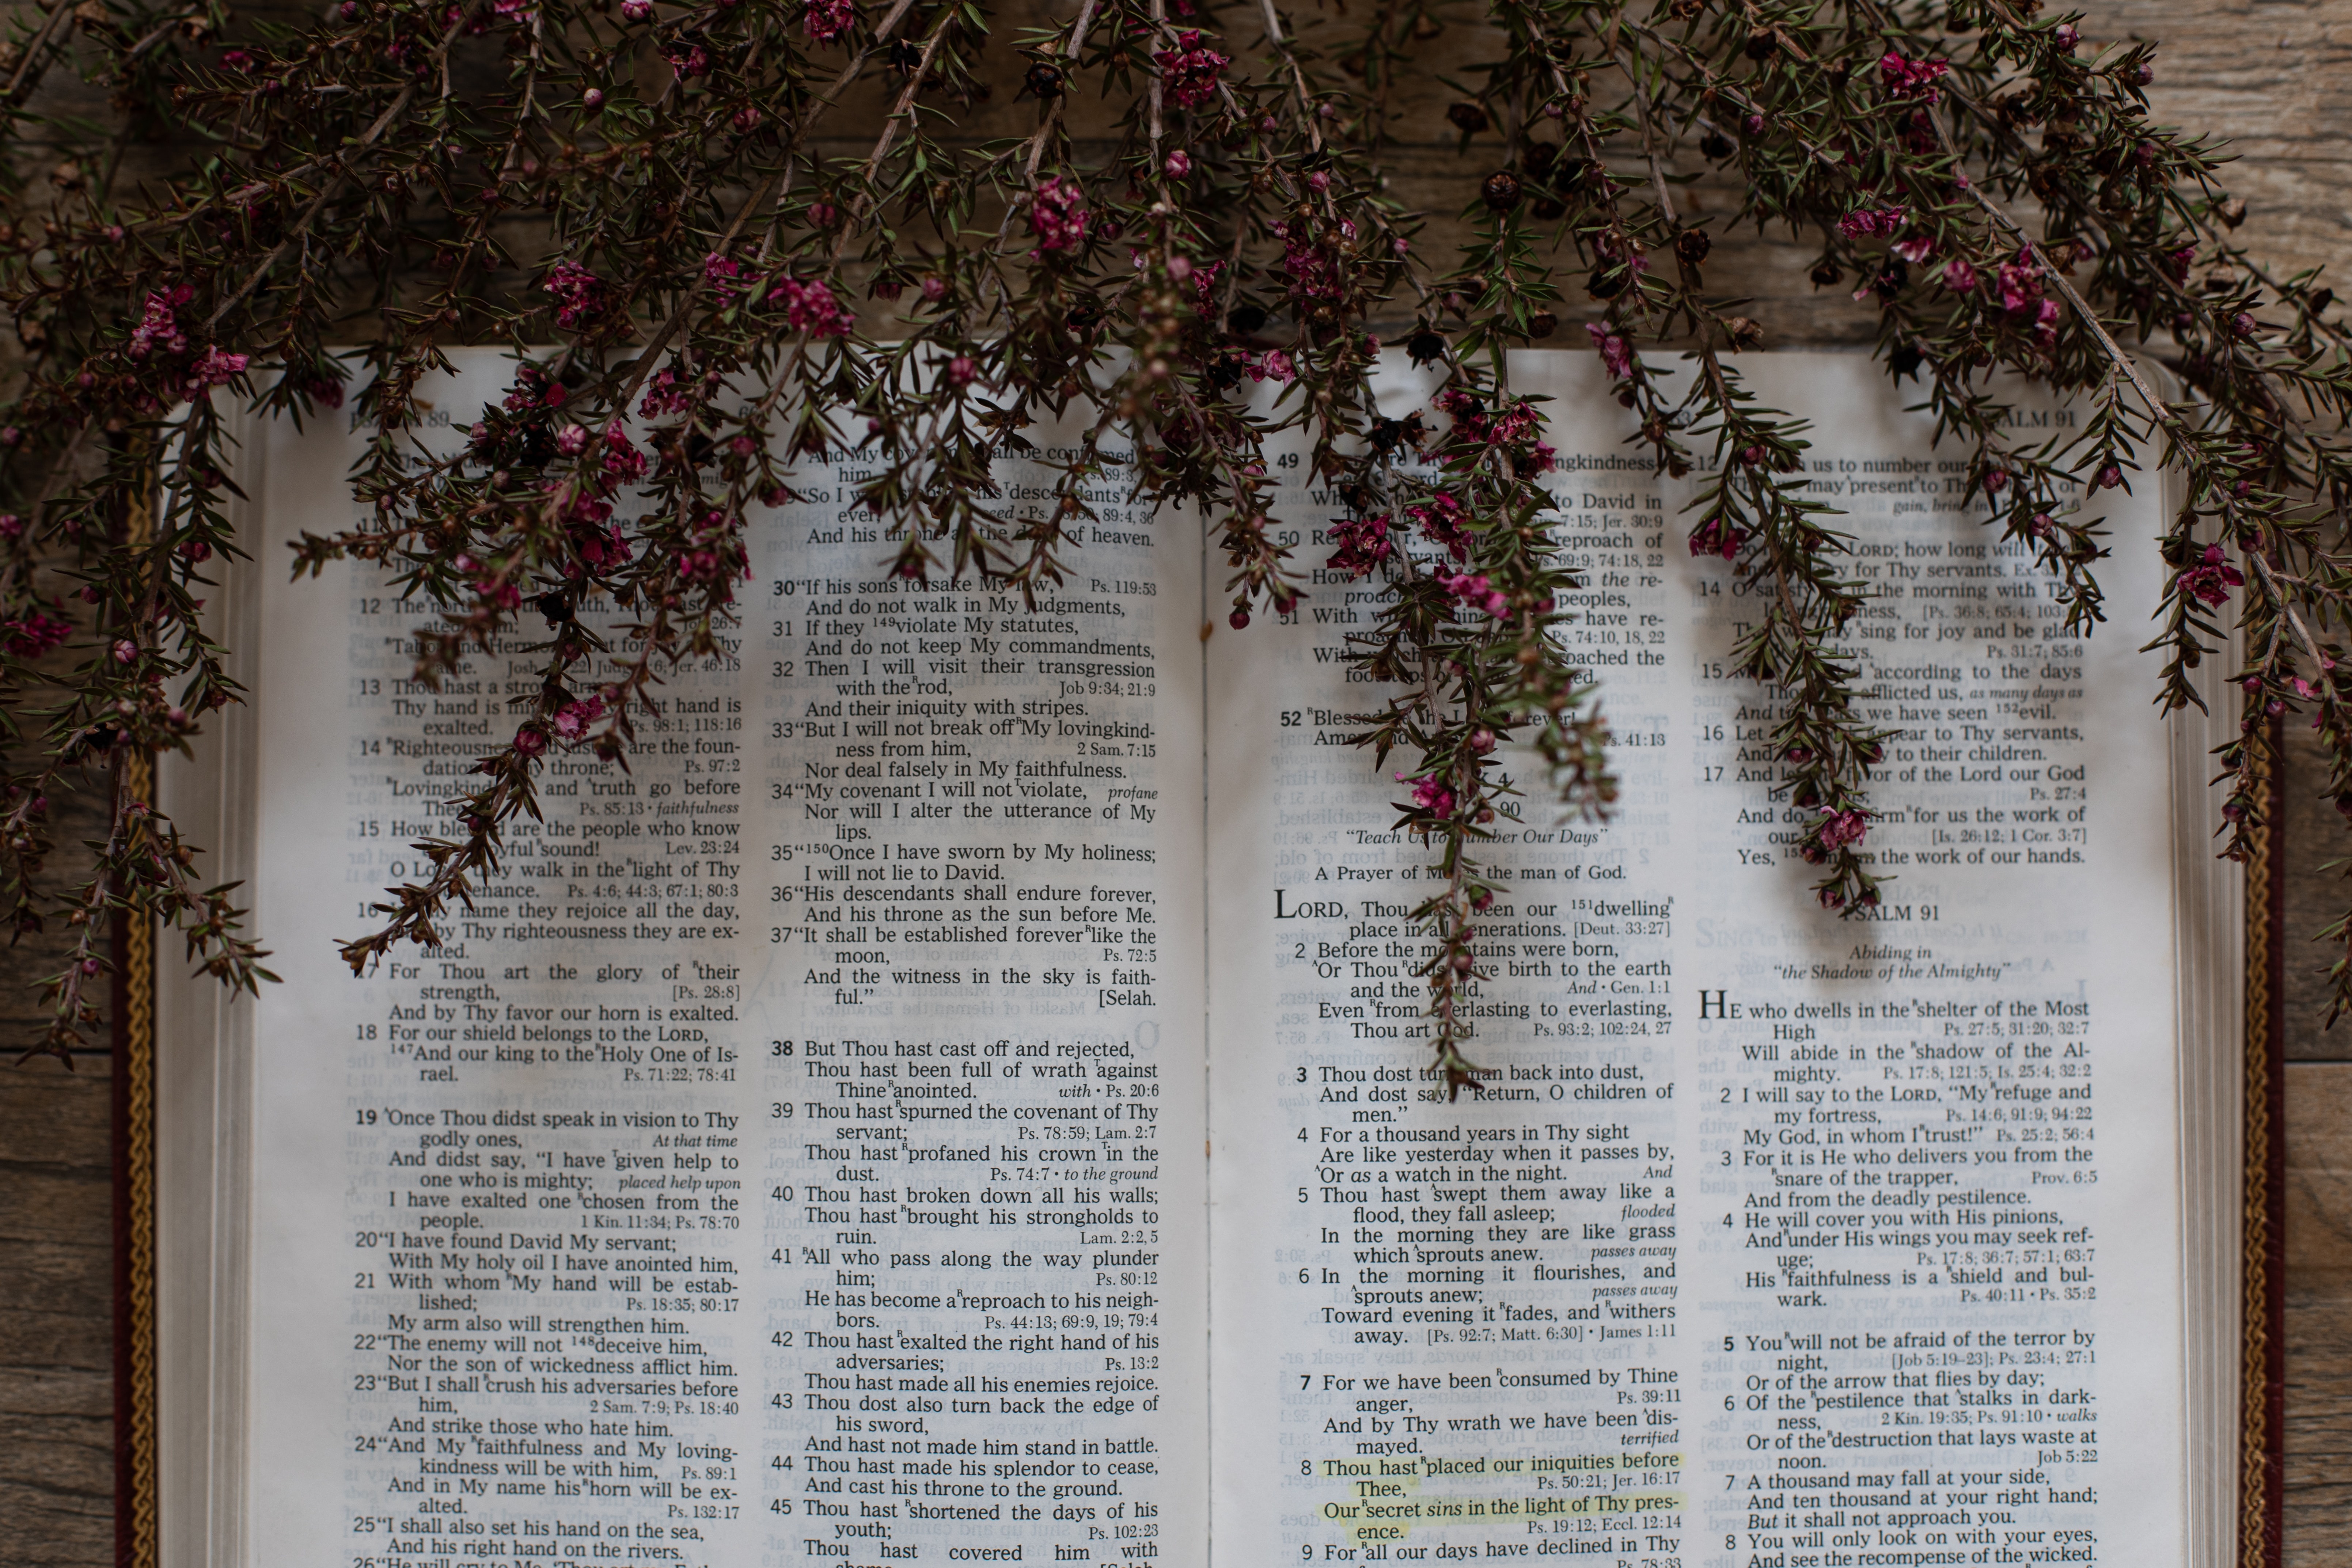 Photo of an open Bible with dried flowers laid on top.